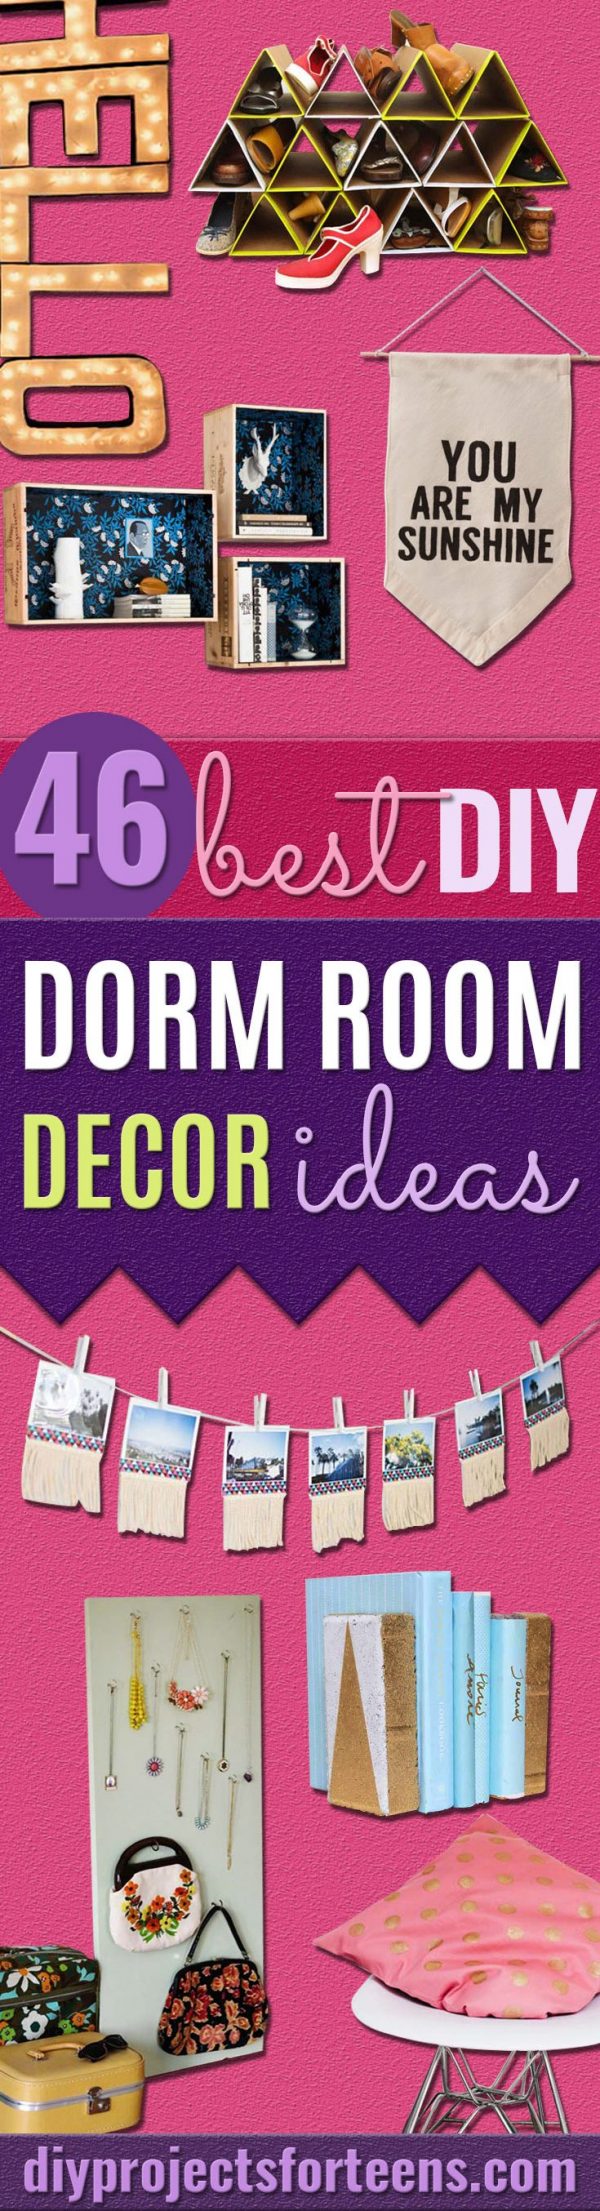 DIY Dorm Room Decor Ideas -Cheap DIY Dorm Decor Projects for College Rooms - Cool Crafts, Wall Art, Easy Organization for Girls - Fun DYI Tutorials for Teens and College Students #diyideas #roomdecor #diy #collegelife #teencrafts